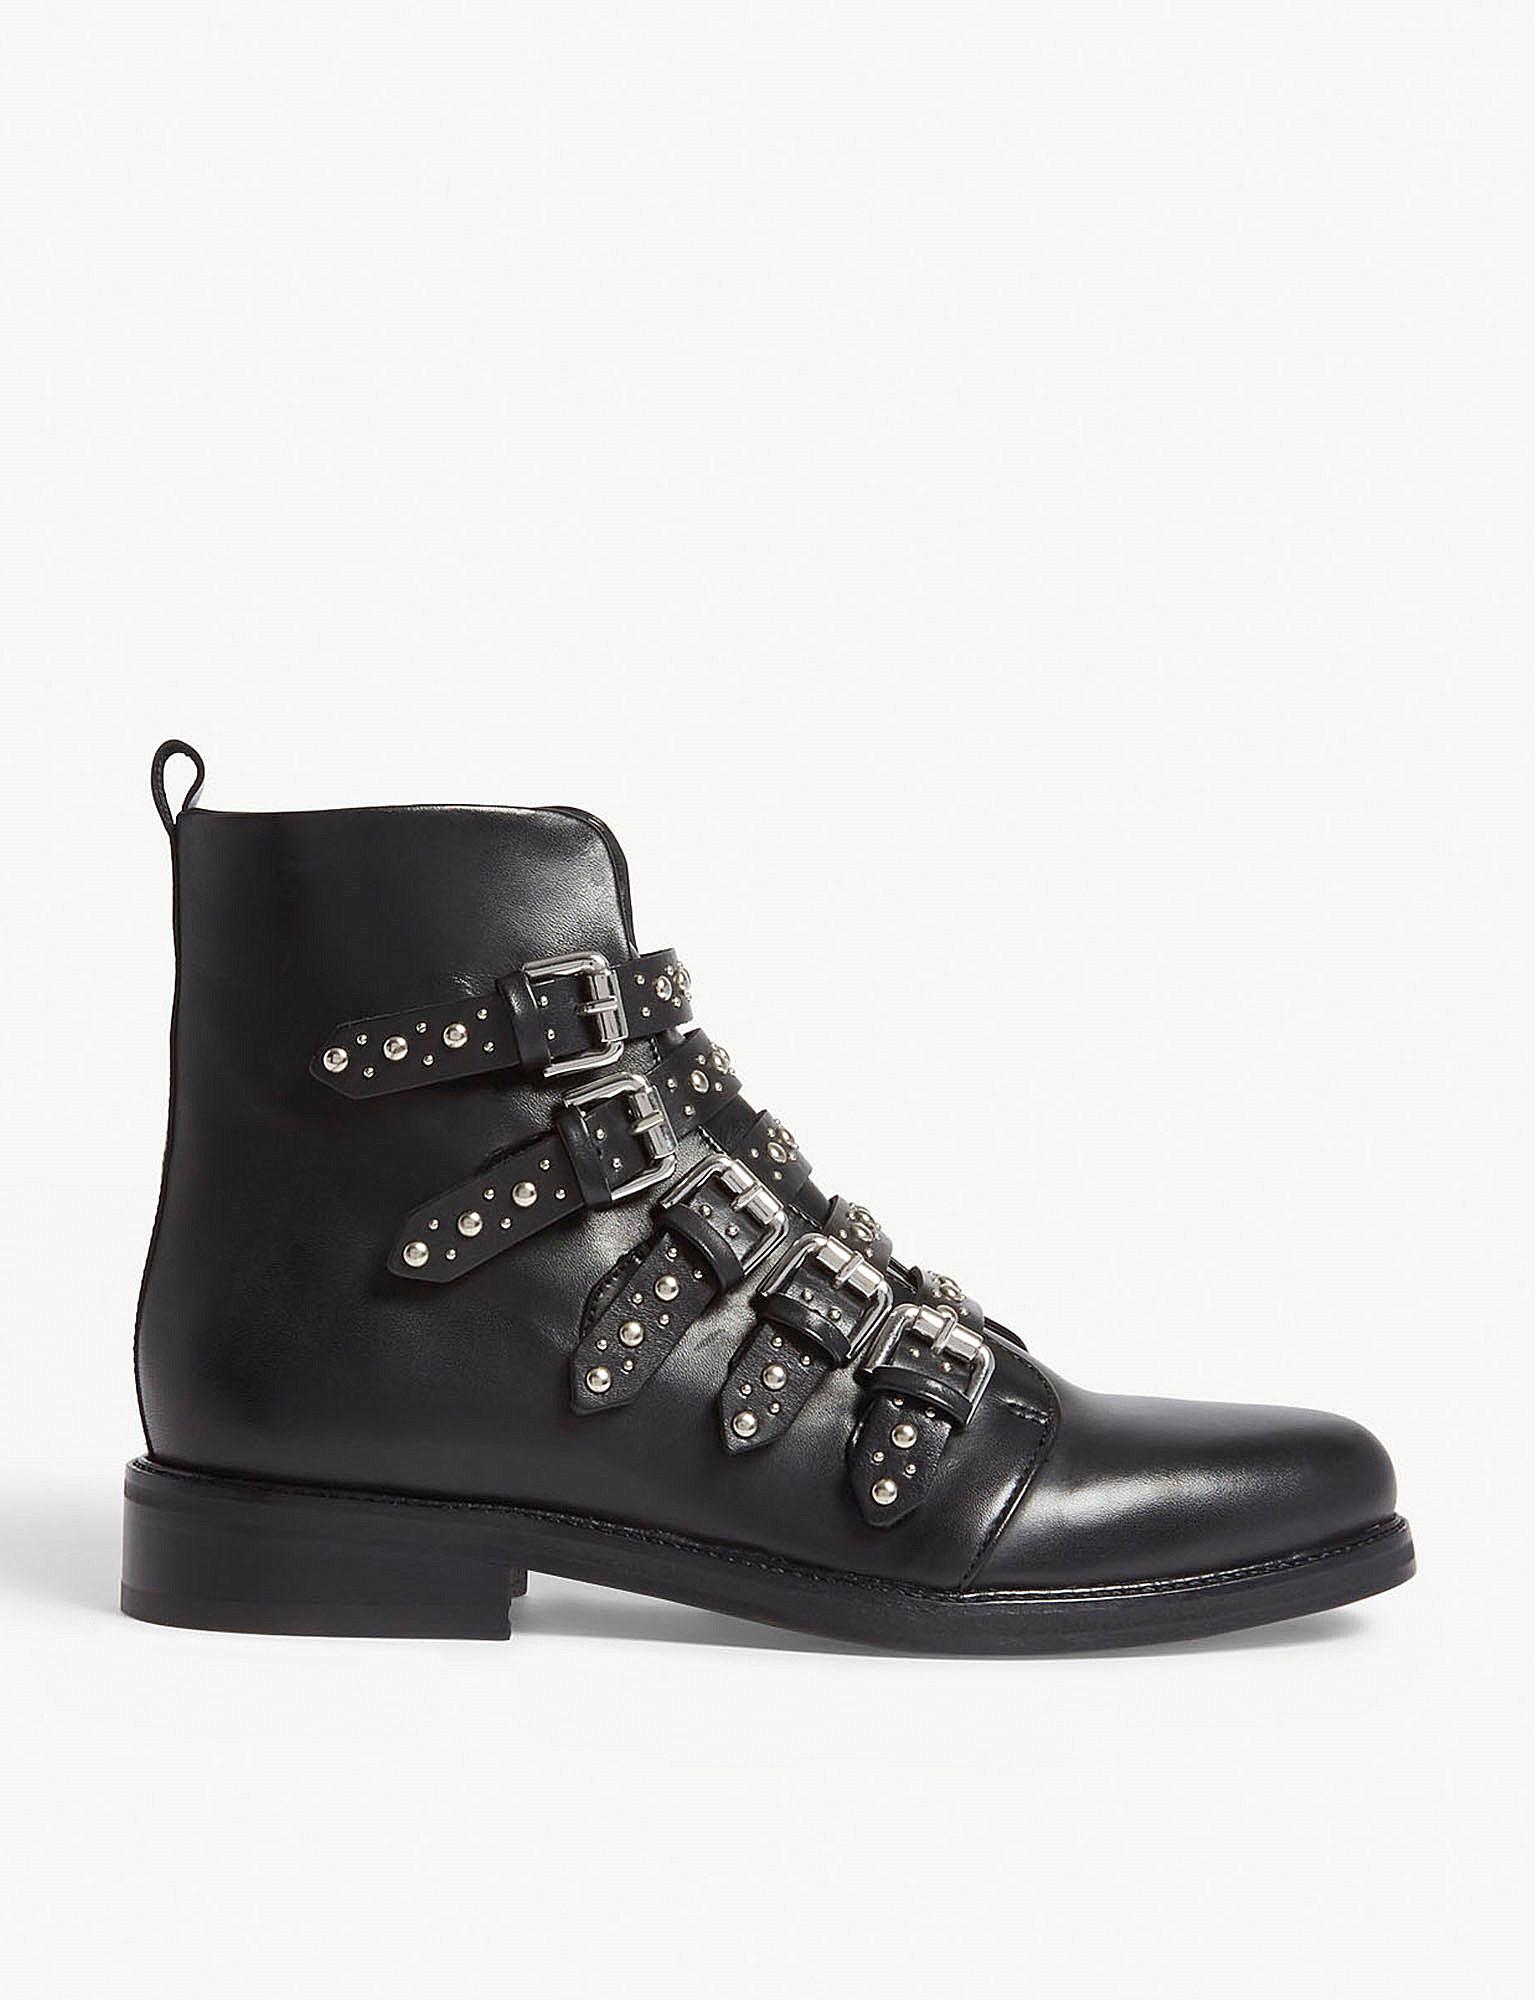 Maje Fortune Studded Leather Boots in Black - Lyst